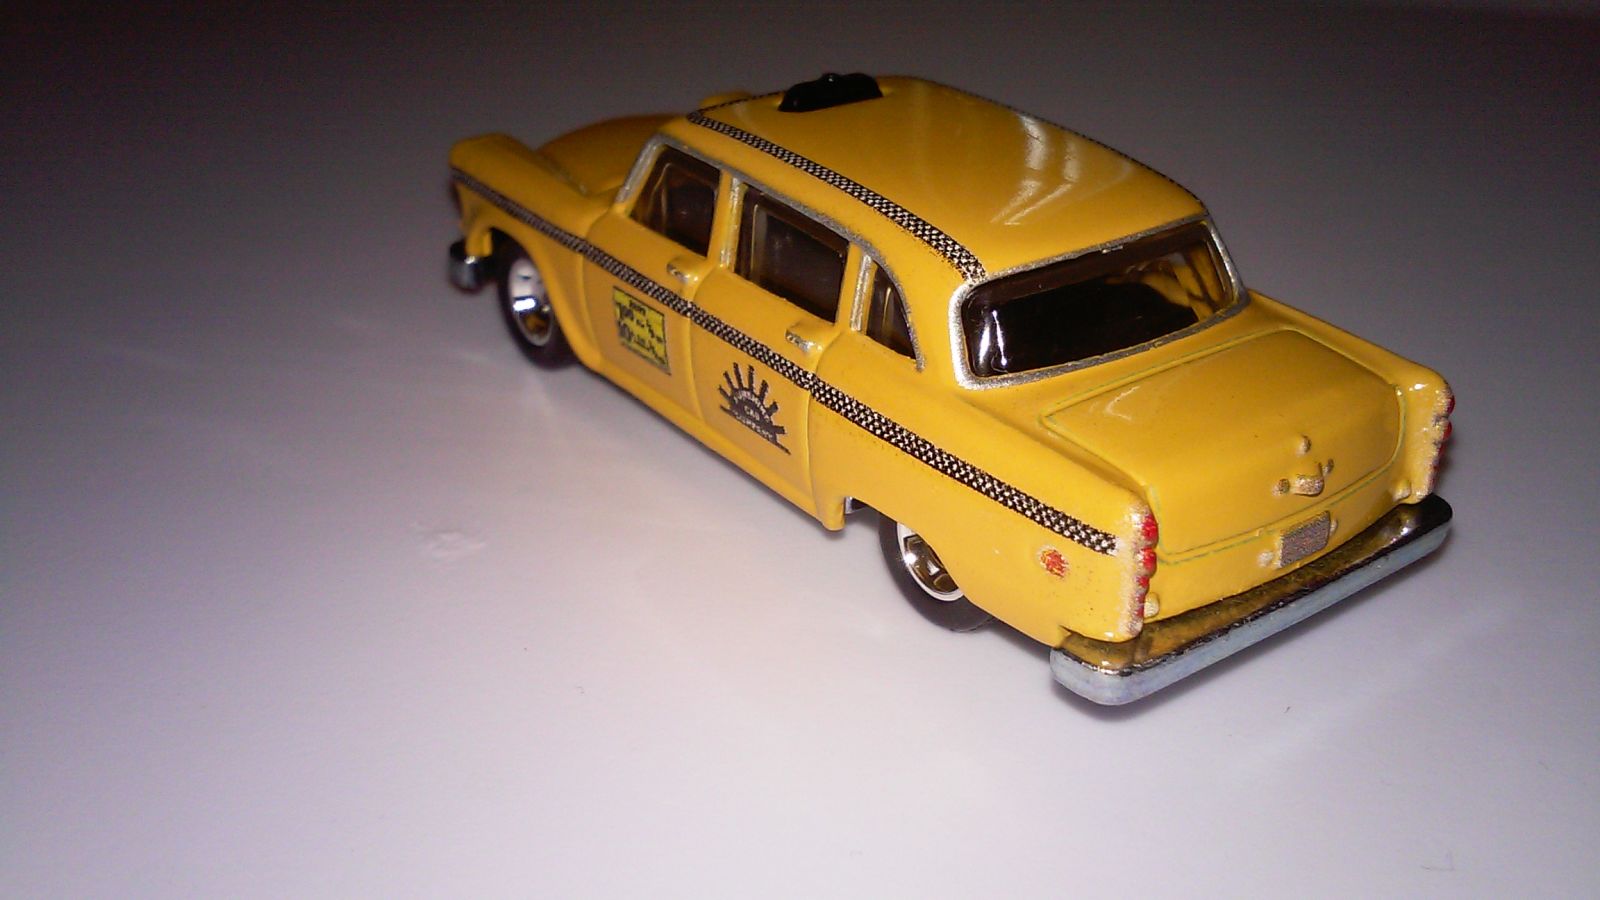 Illustration for article titled Hot Wheels 74 Checker Taxi Cab